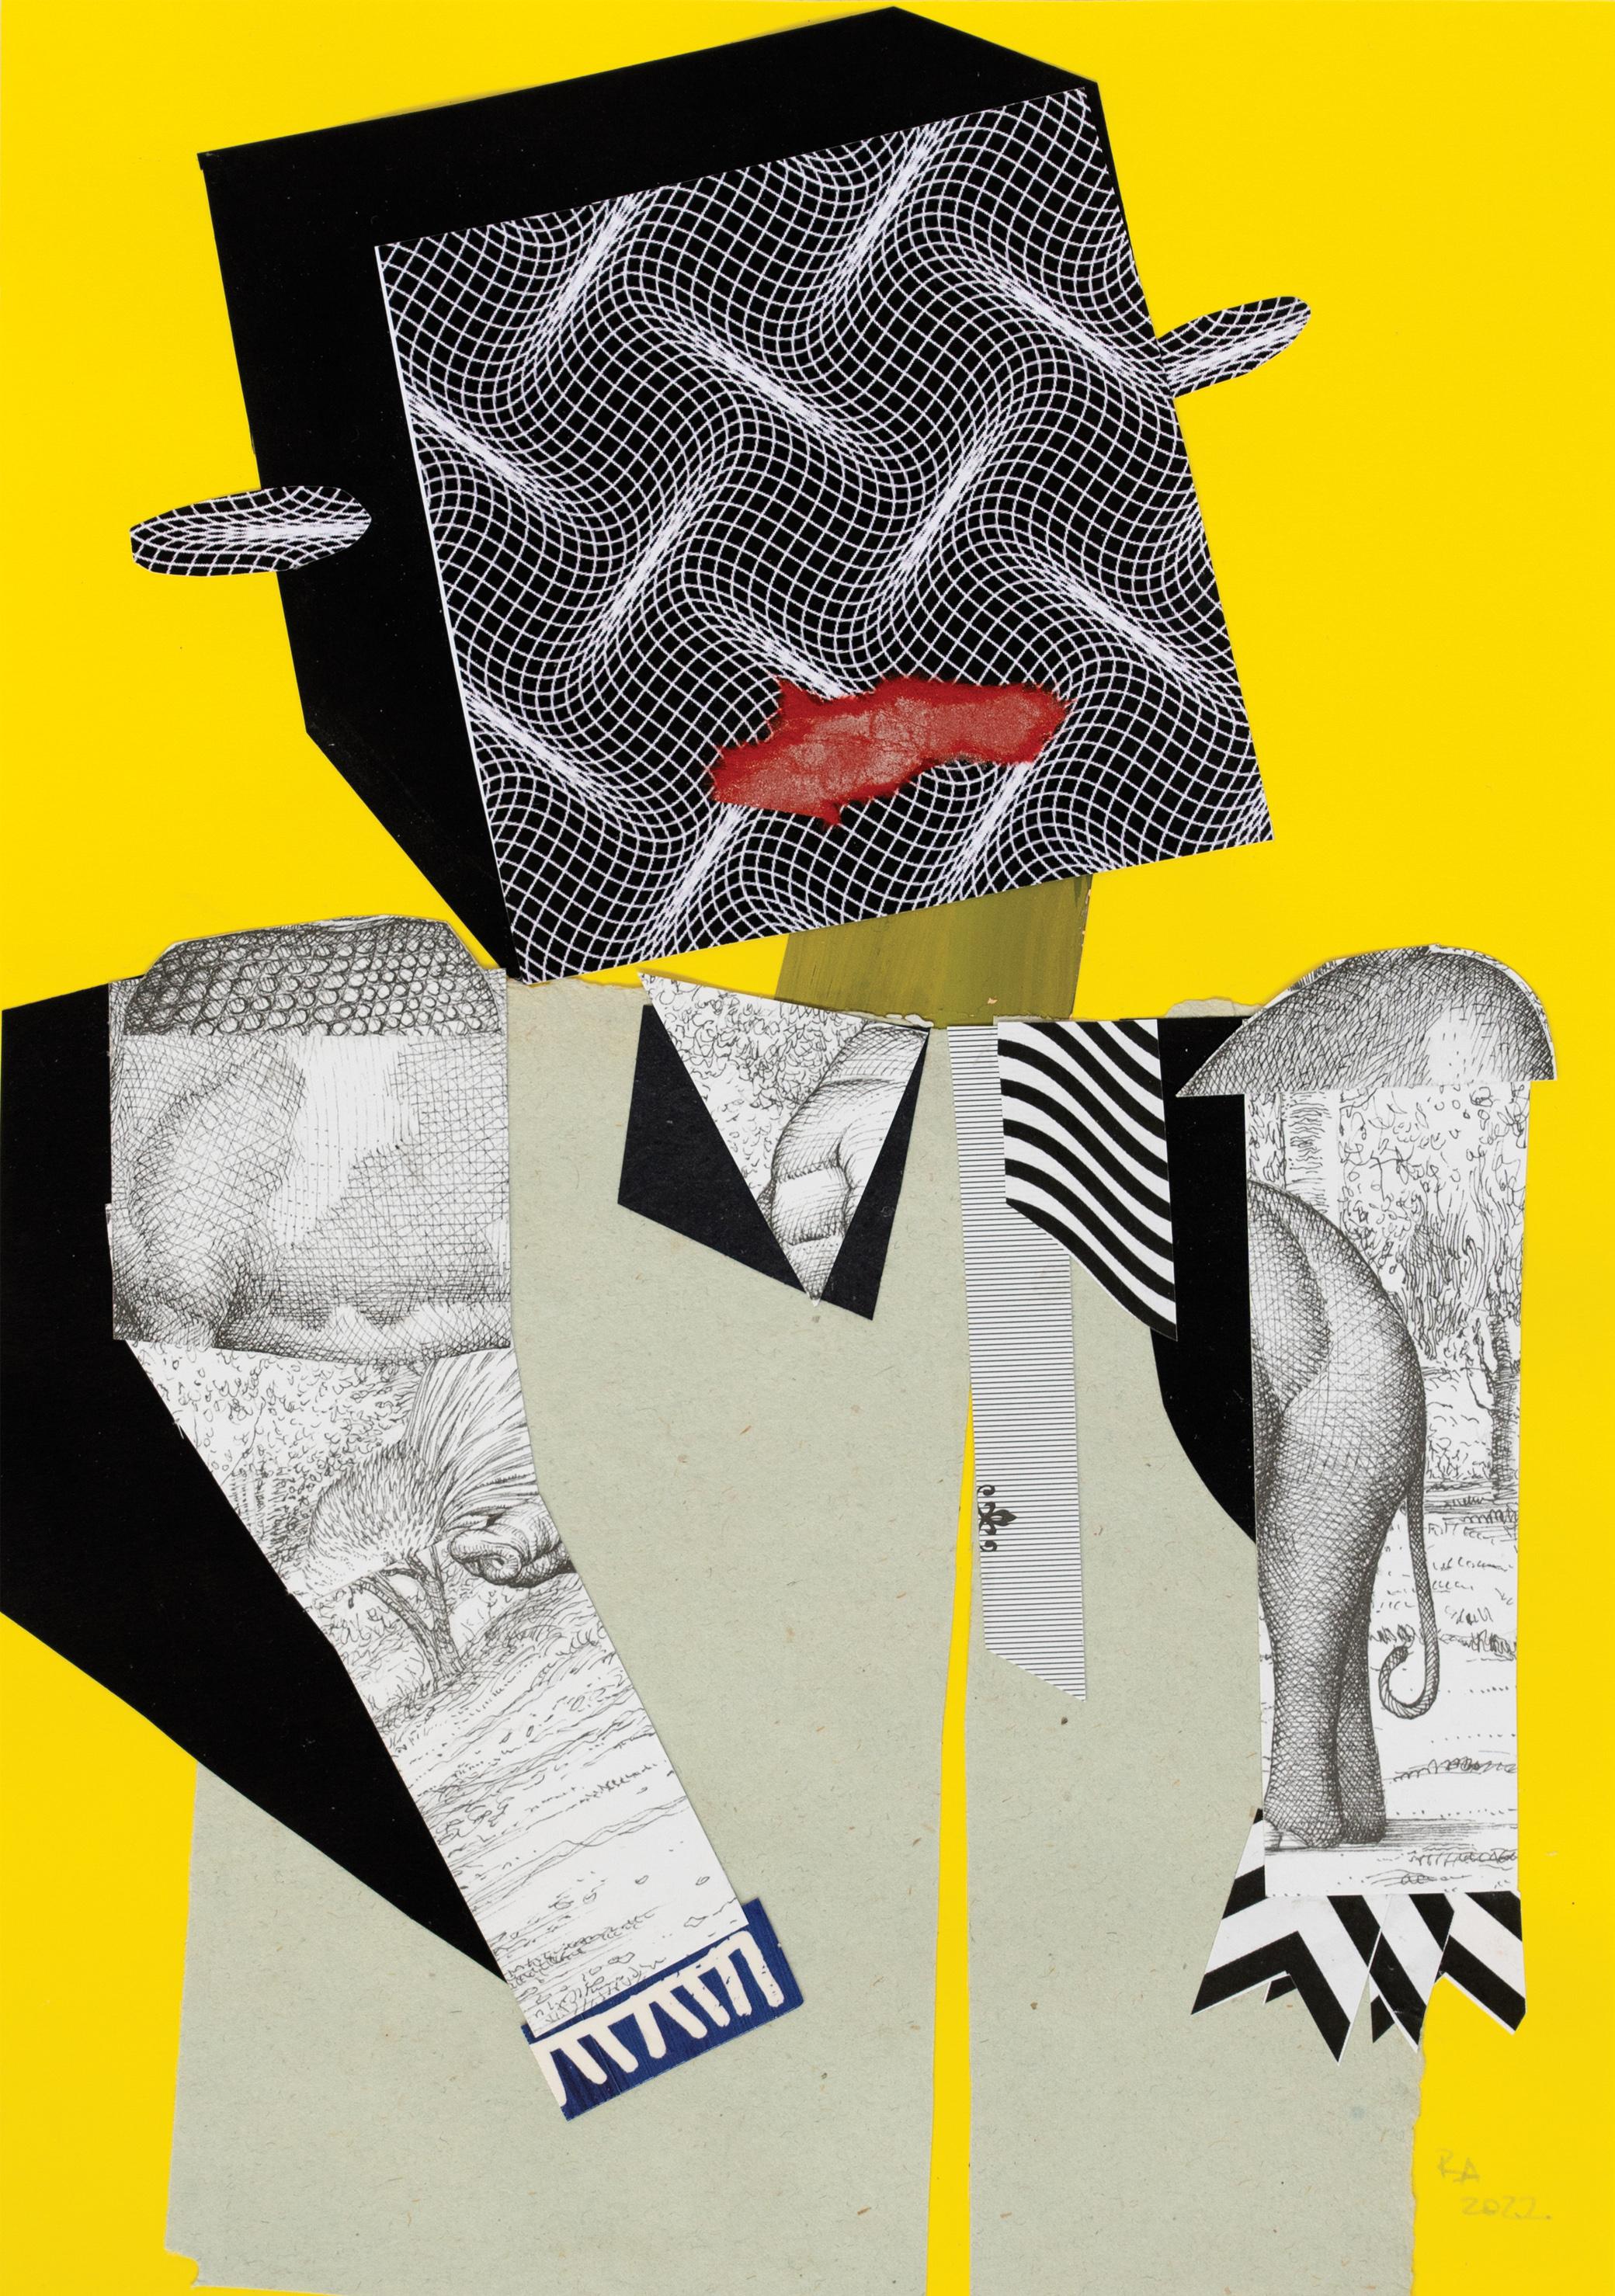 The Character from the Mirror - Yellow, Black, Collage, Surrealism